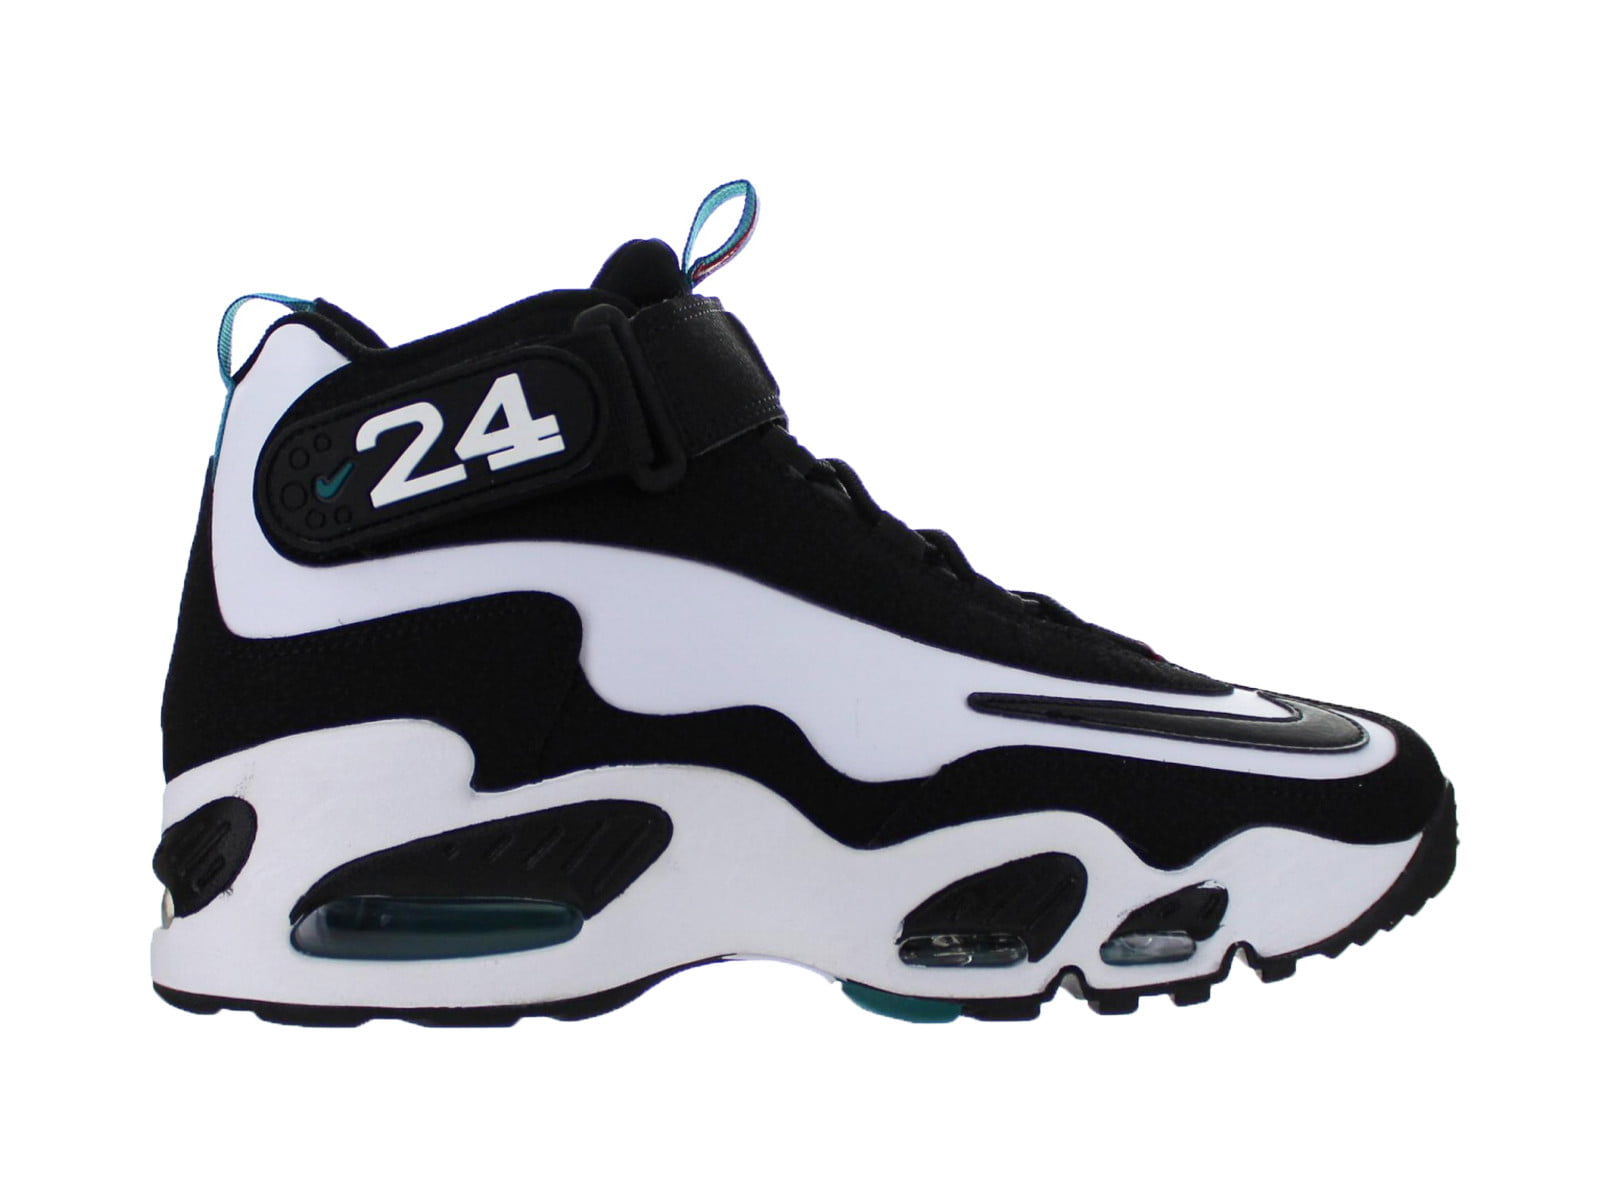 Nike Air Griffey Max 1 Mens Style: 354912-107 Size : 12 M US